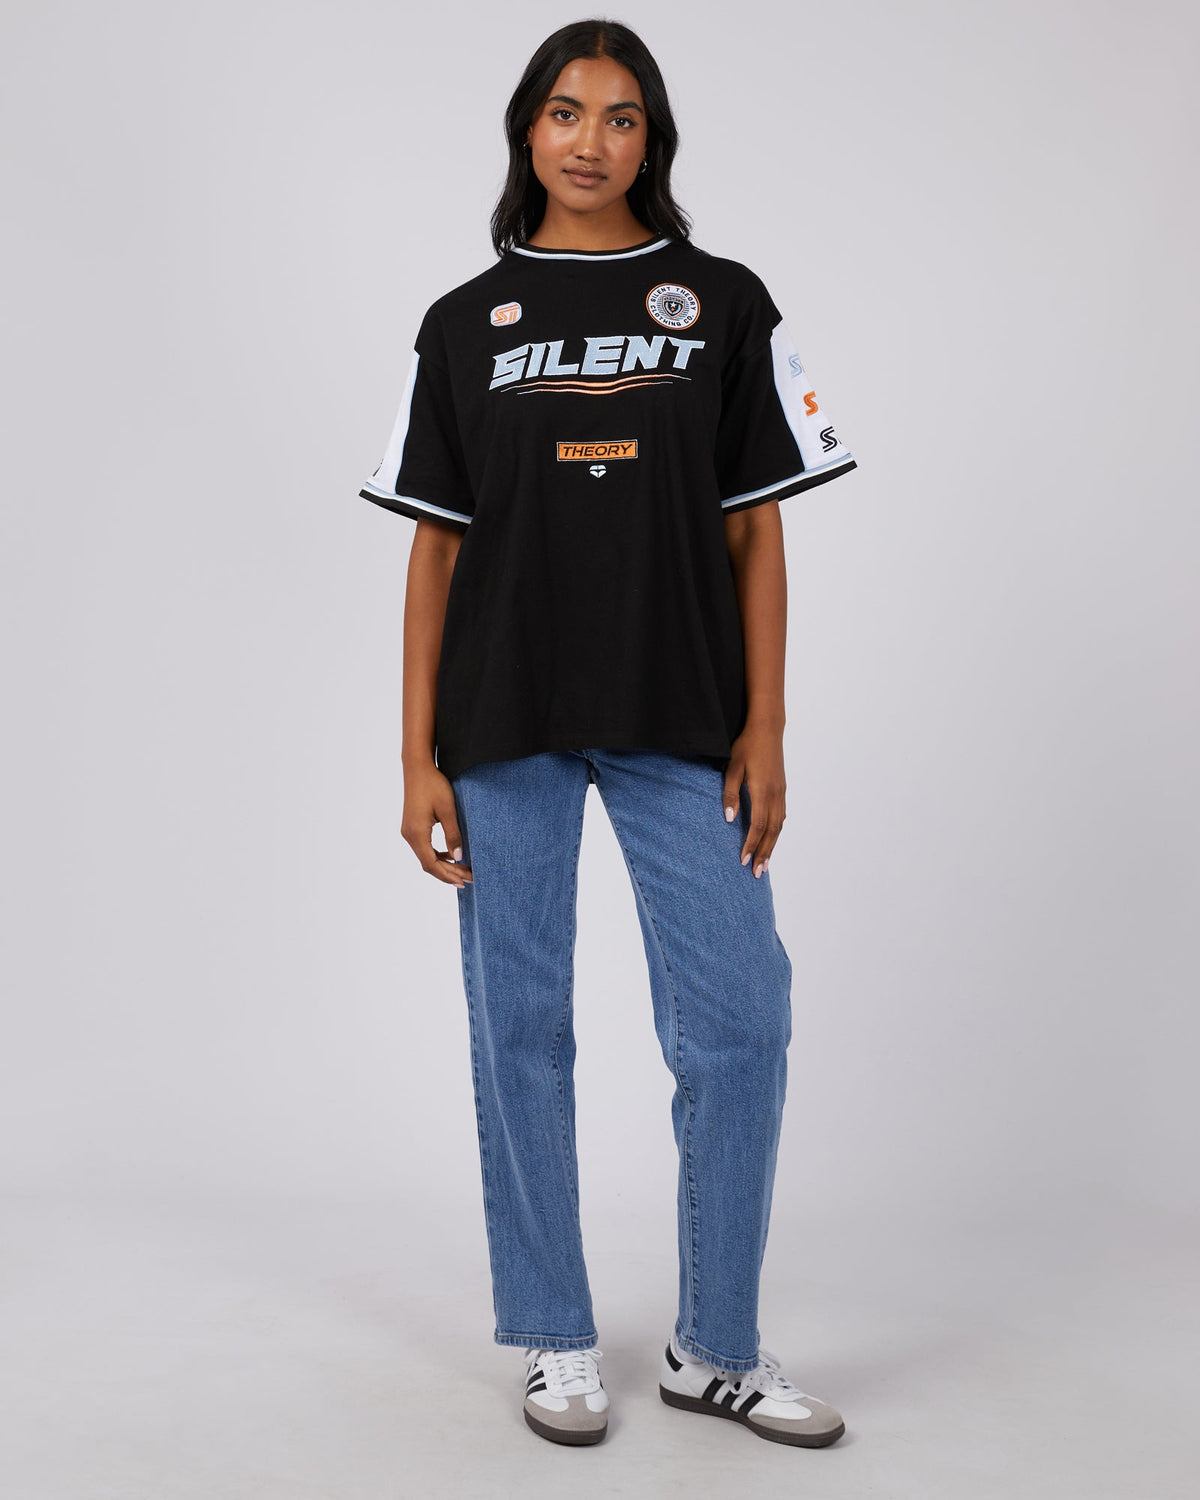 Silent Theory Ladies-Nations Tee Black-Edge Clothing